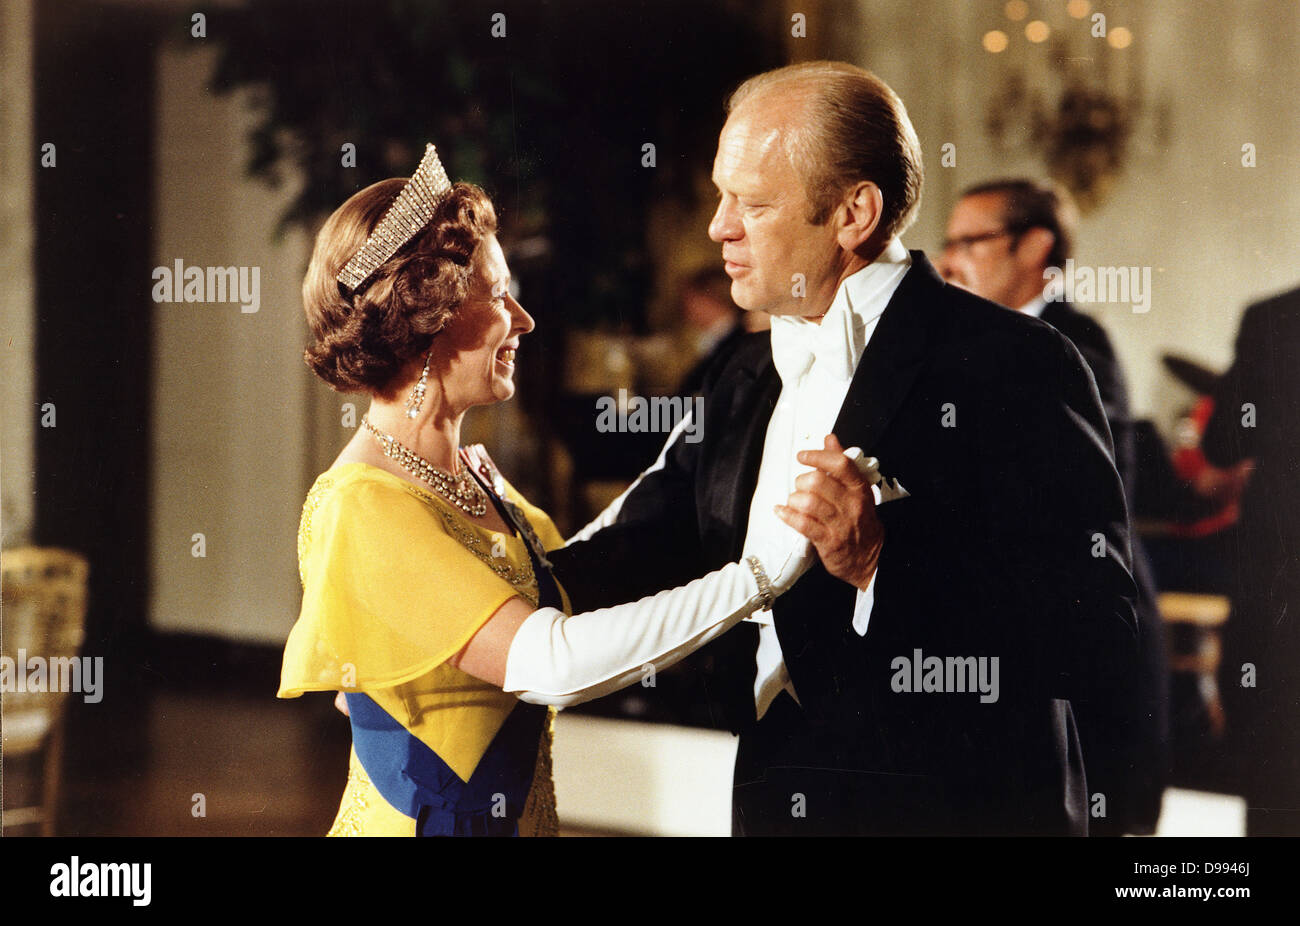 Gerald Ford (1913-2006) 38th President of the United States 1974-1977, dancing with Queen Elizabeth II at the ball at the White House, Washington, during the 1976 Bicentennial Celebrations of the Declaration of Independence. Stock Photo